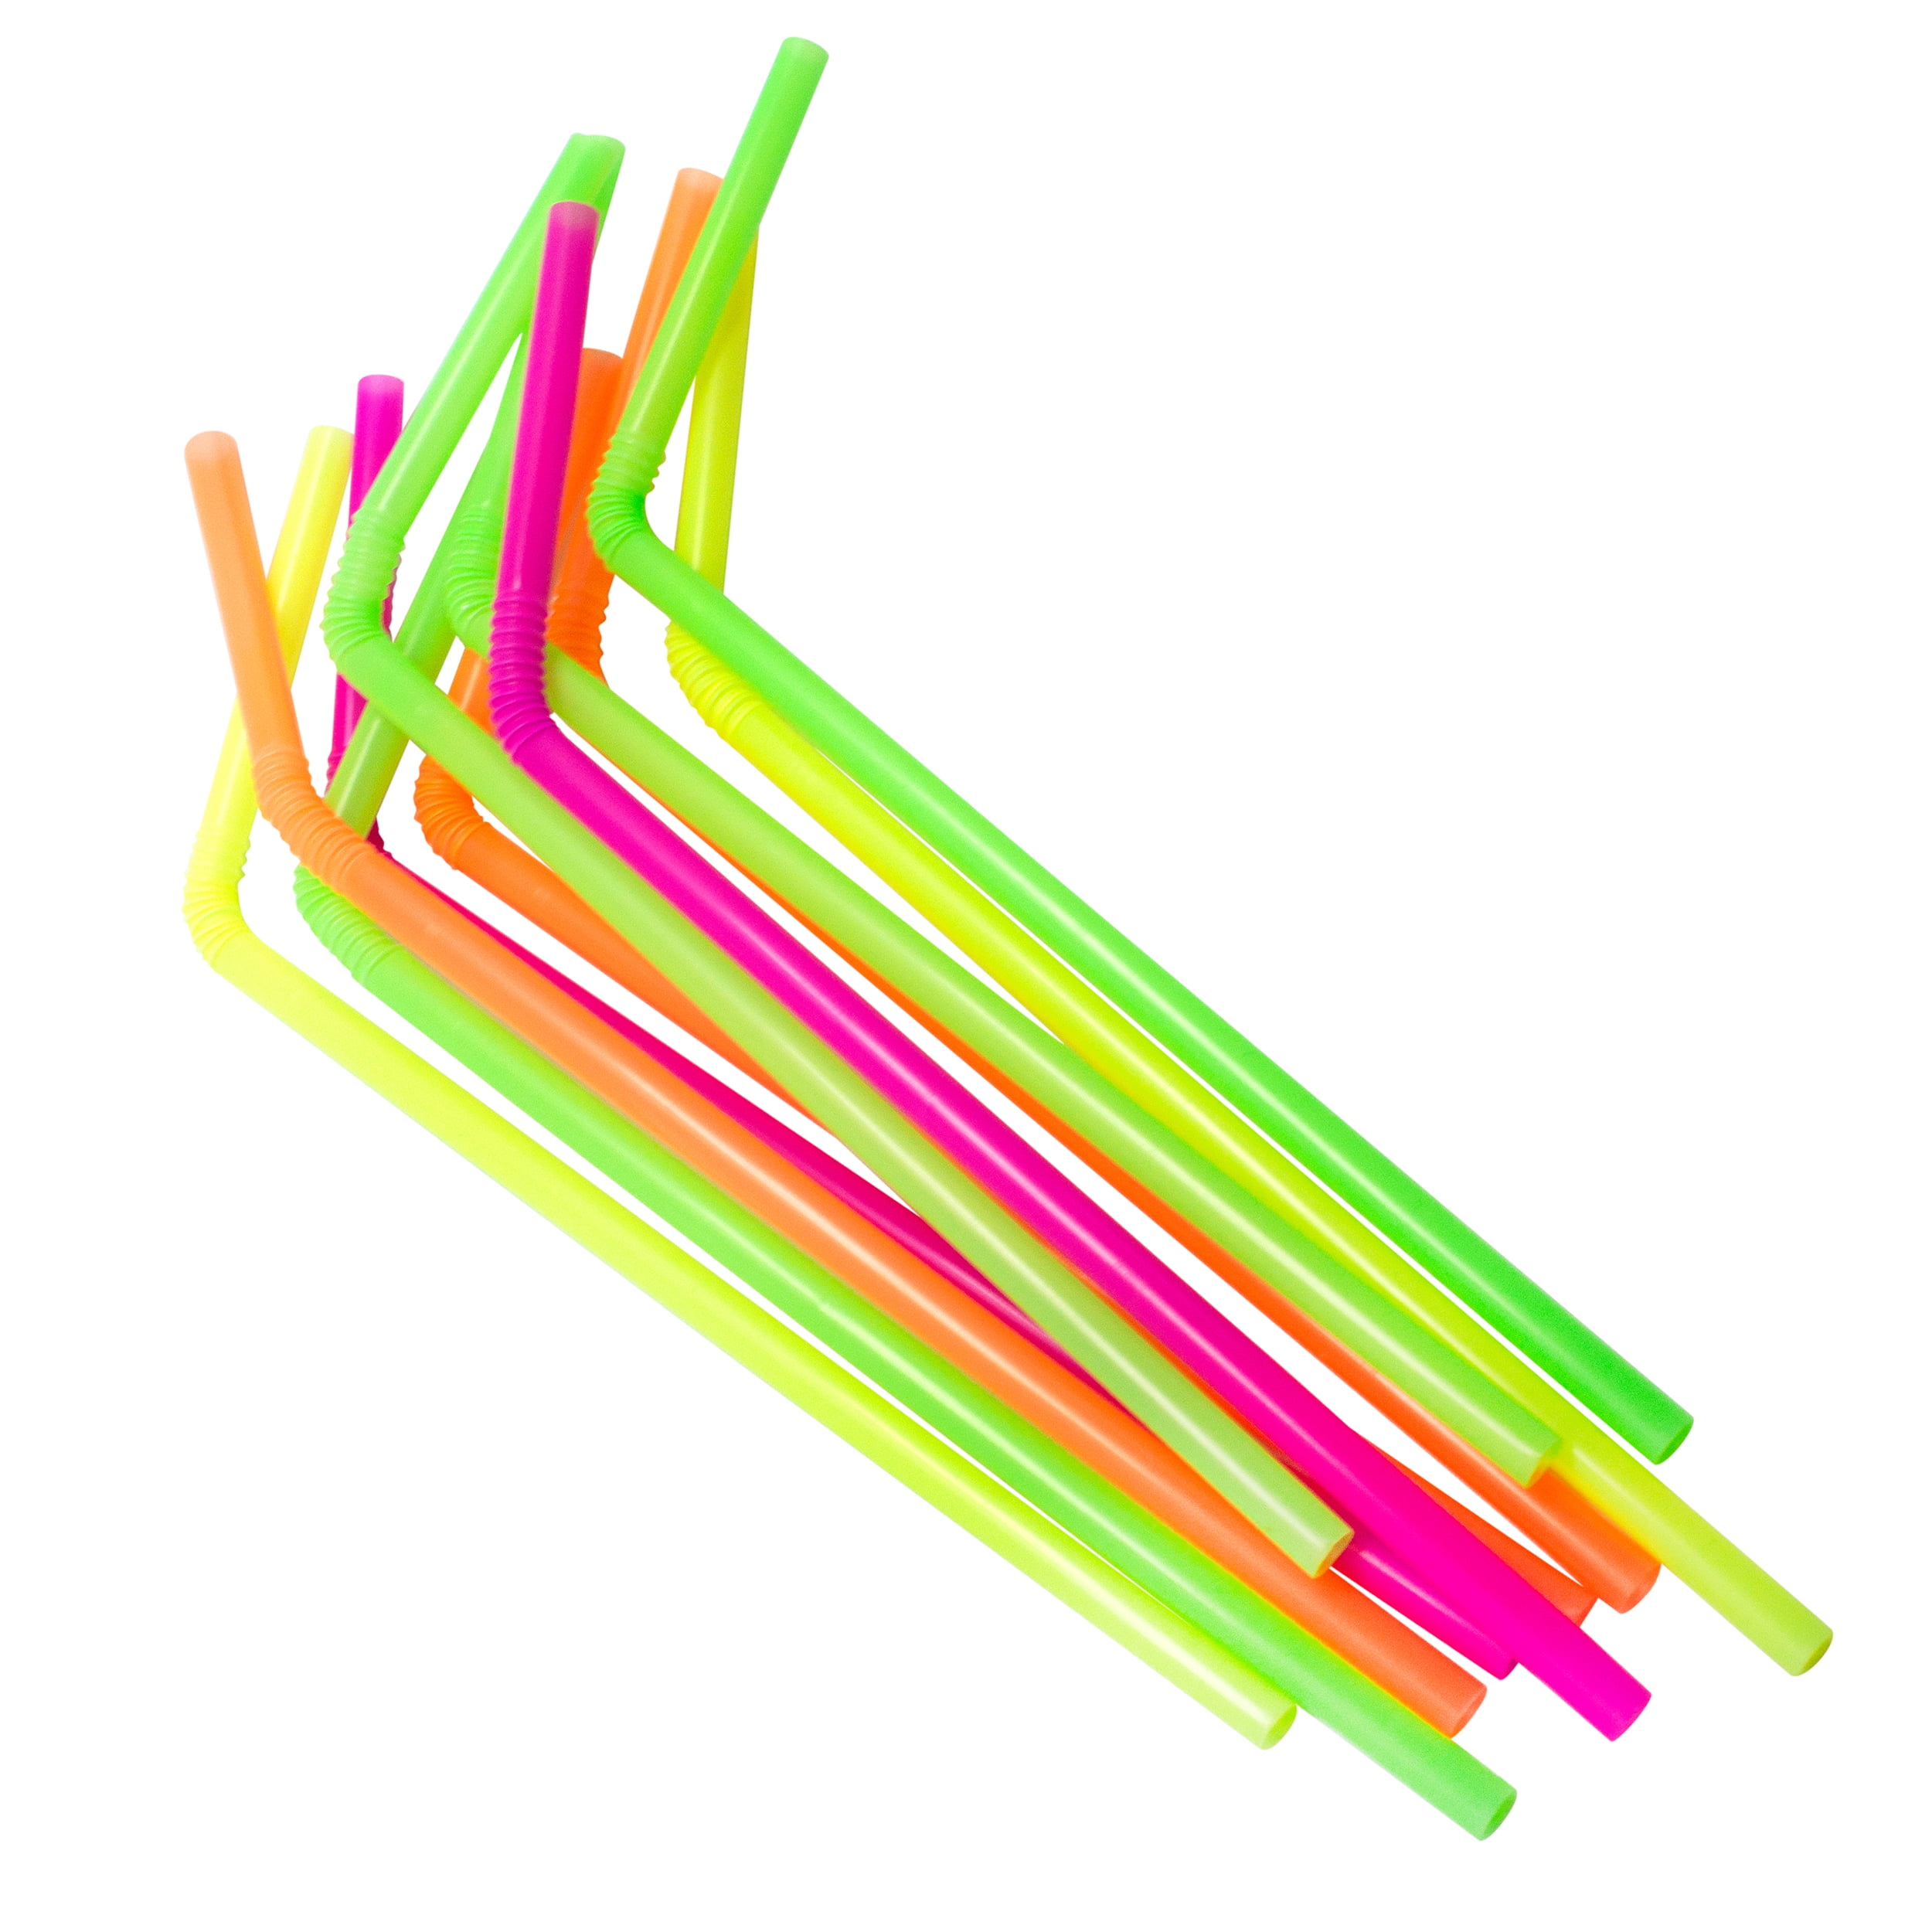 NEON PINK WILLY STRAWS PACK OF 15 NOVELTY DRINKING STRAWS HEN PARTY  ACCESSORIES